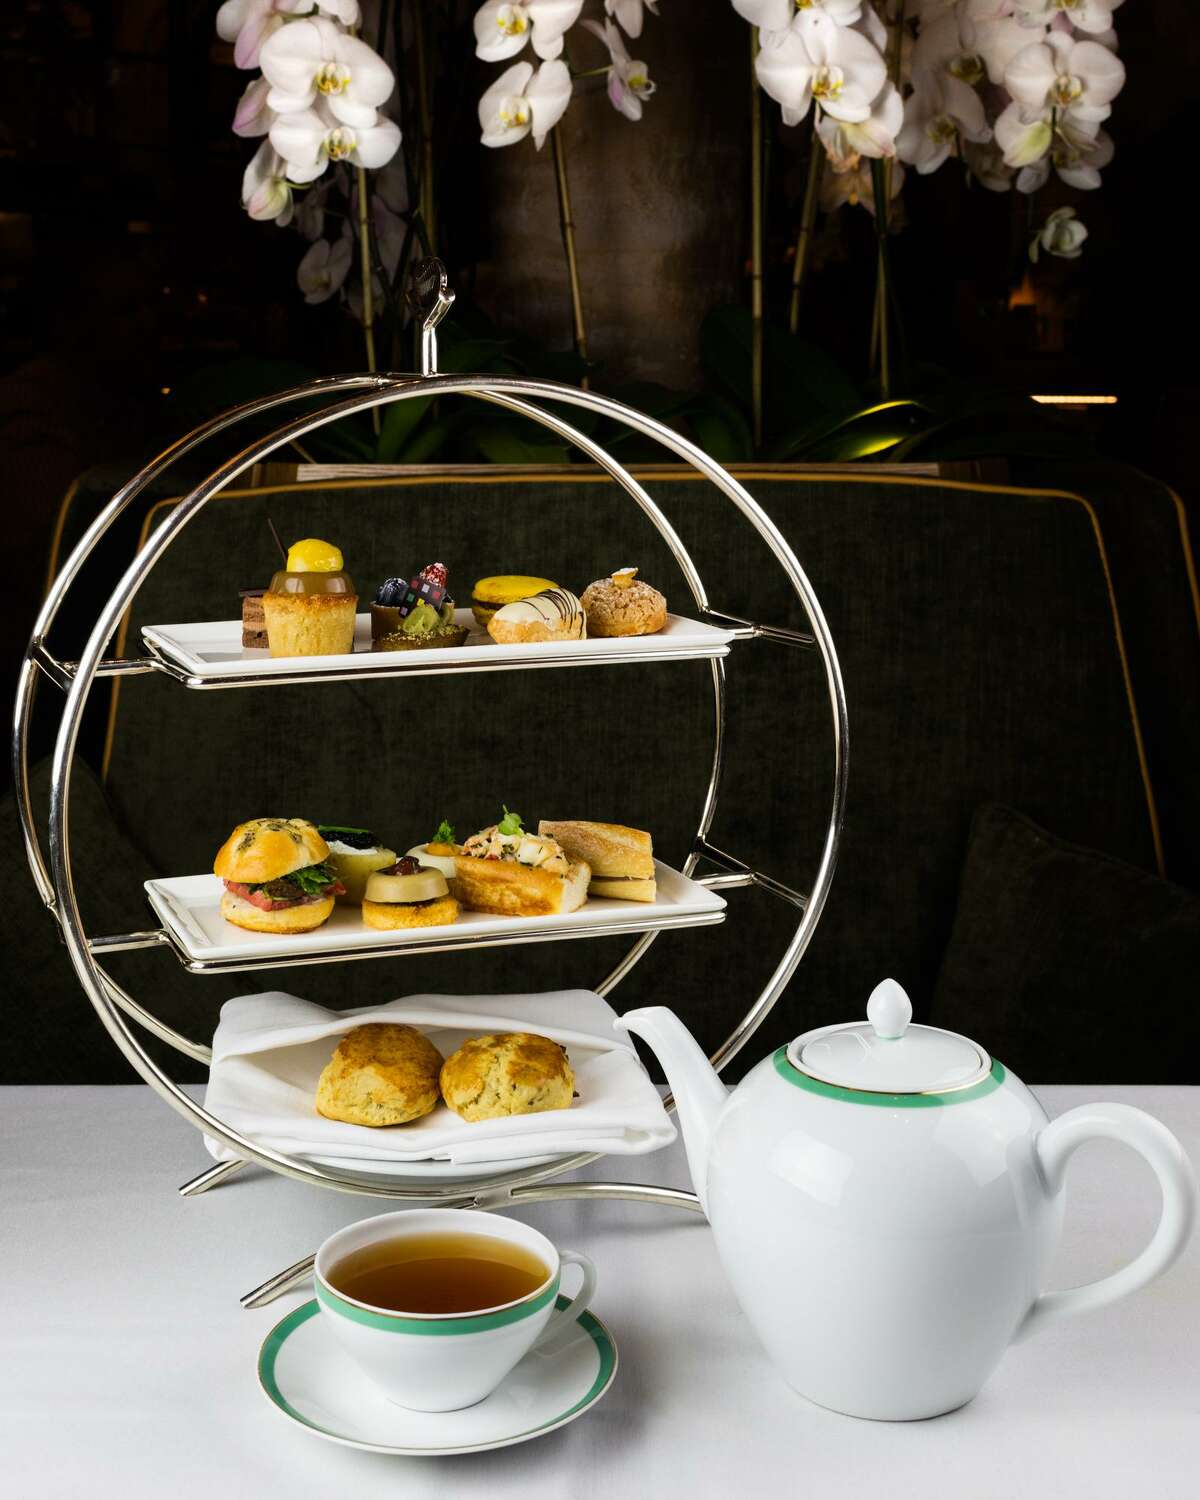 Afternoon tea is served at New York’s Plaza Hotel.